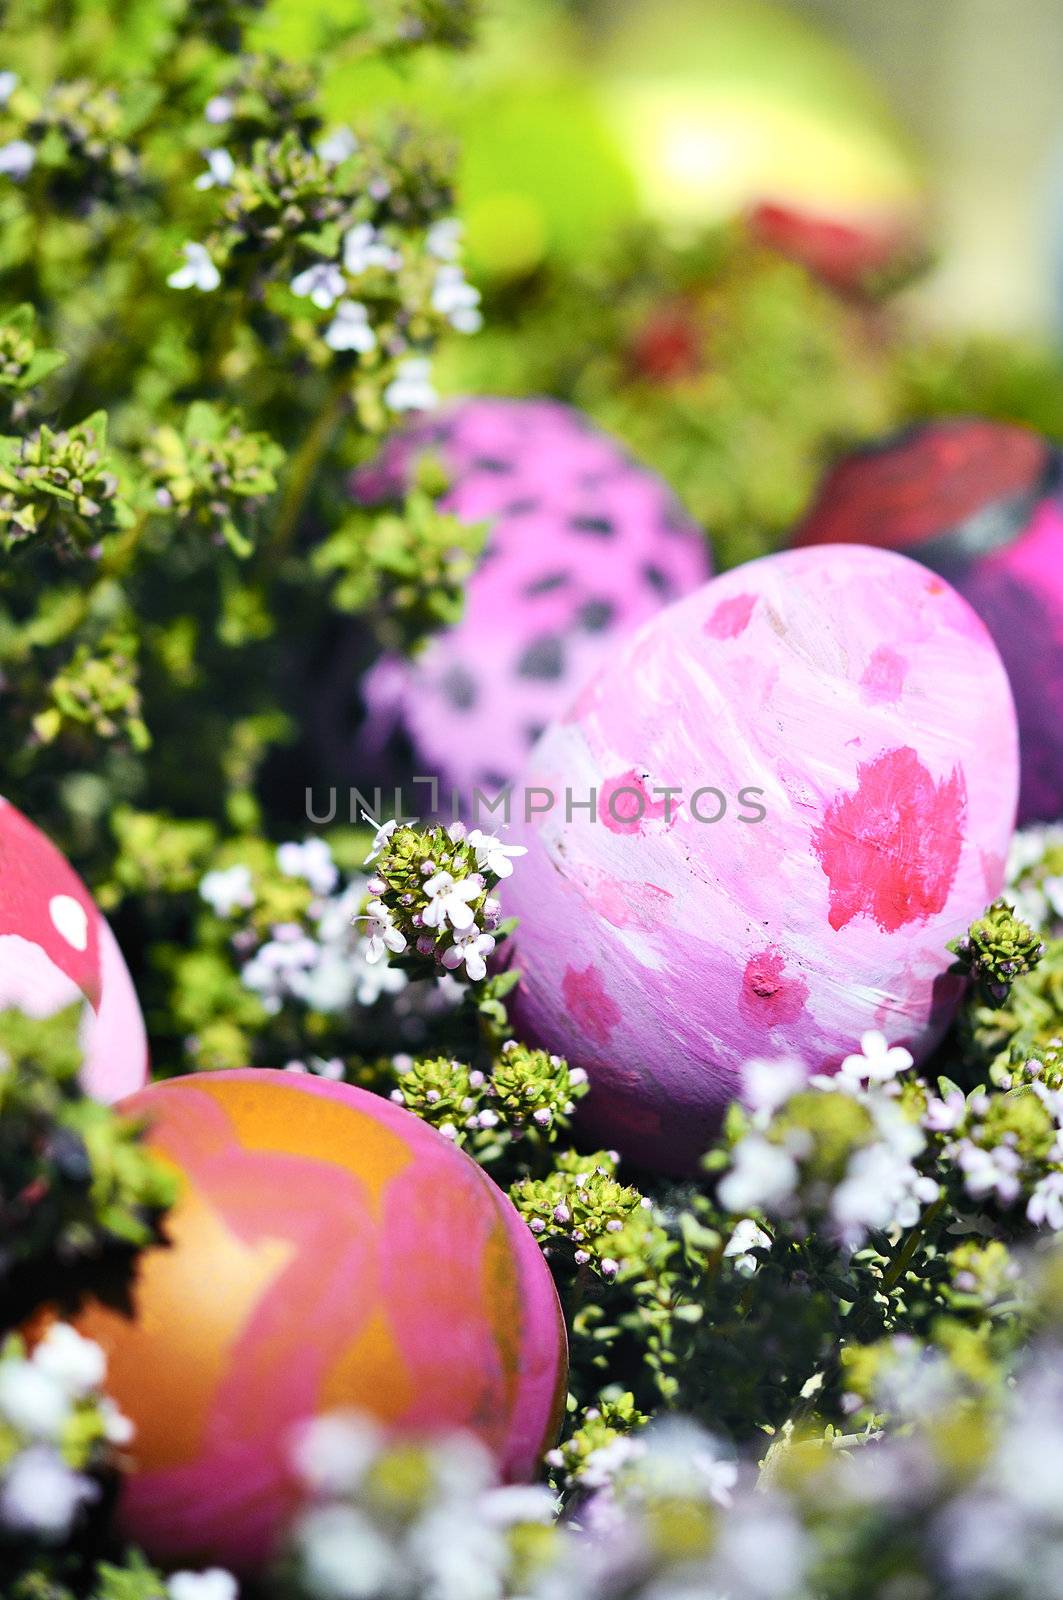 Row of Easter Eggs with Daisy on Fresh Green Grass 